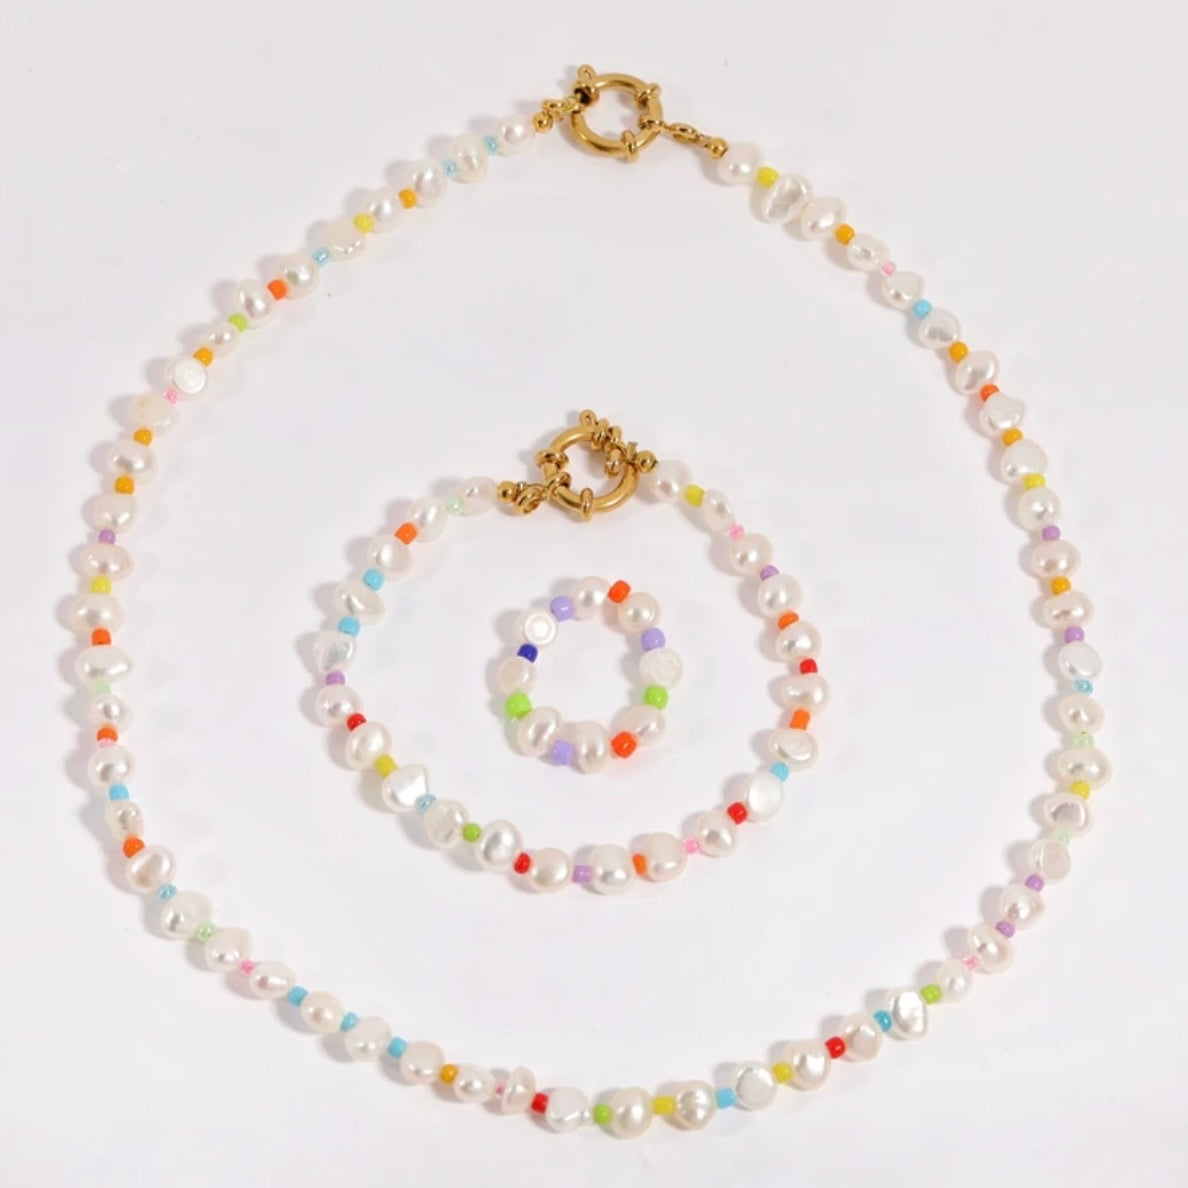 Euro summer freshwater pearl and bead bracelet